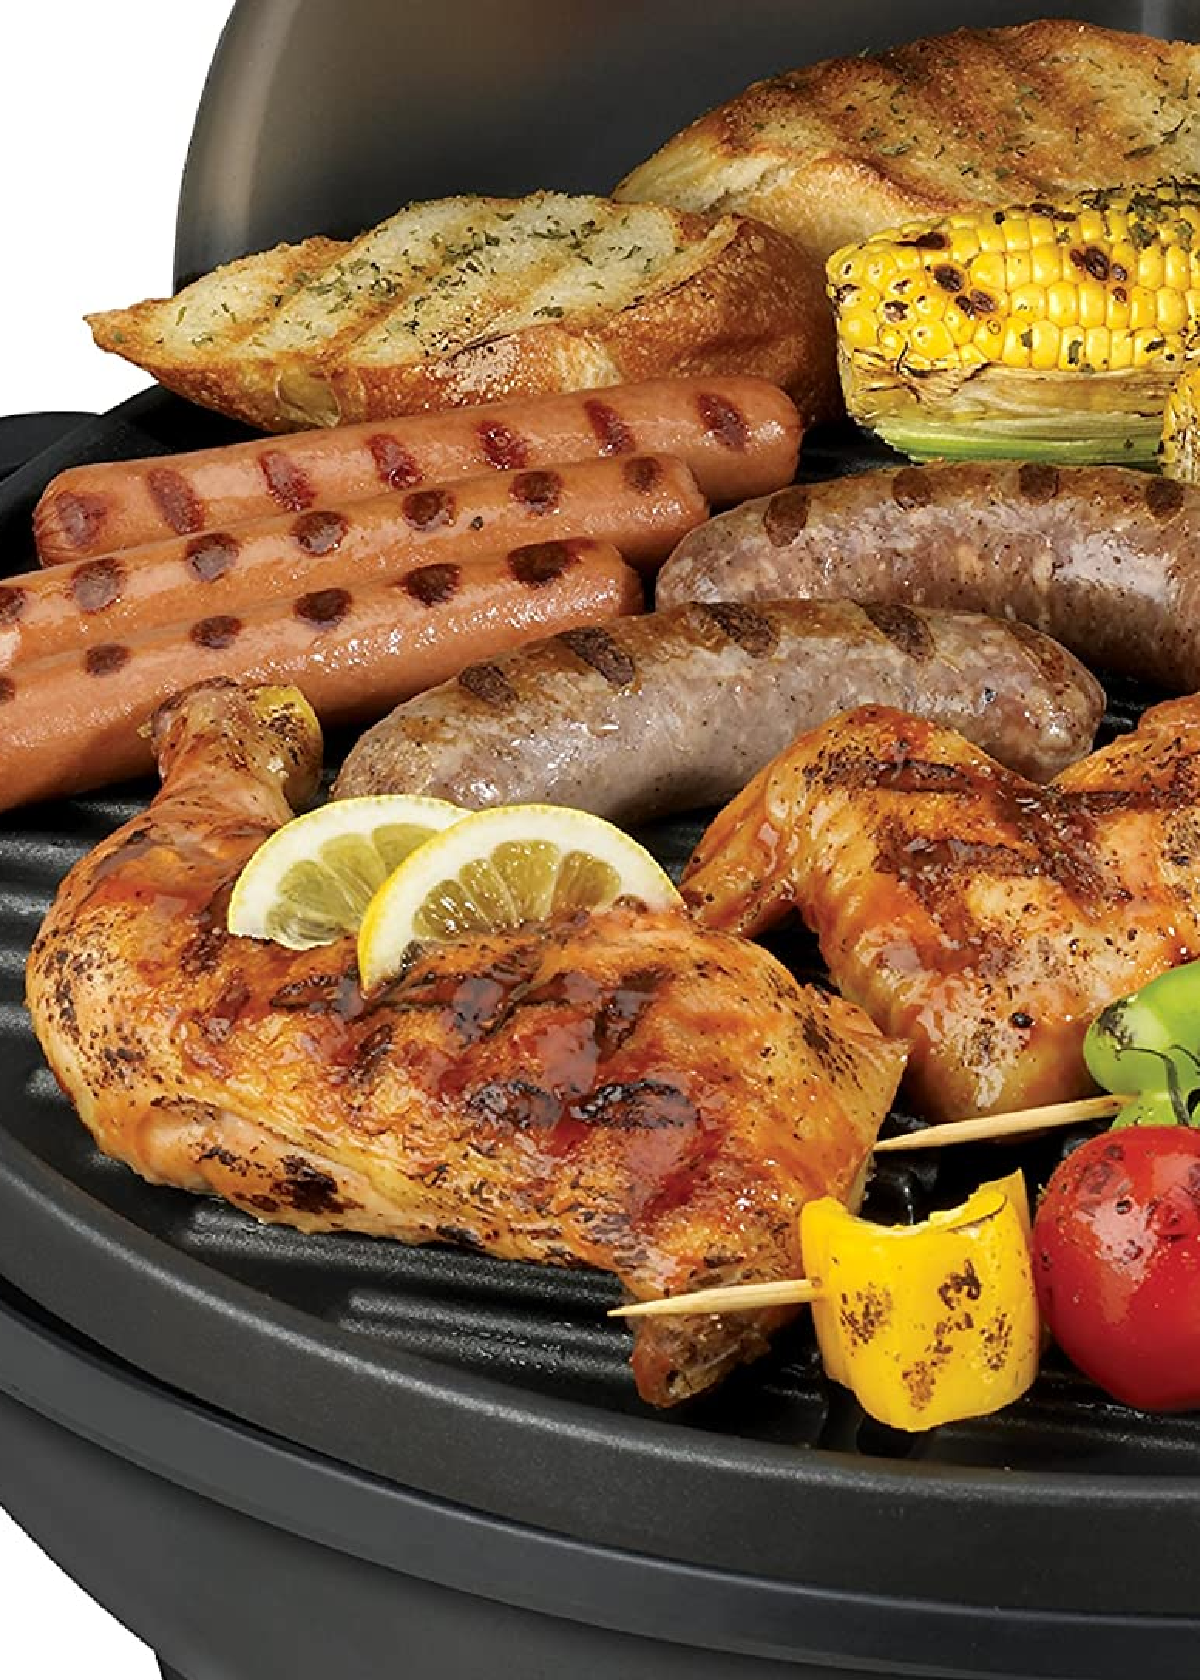 Electric Grill: The Gadget You Can't Miss For Summer Outdoor Gatherings